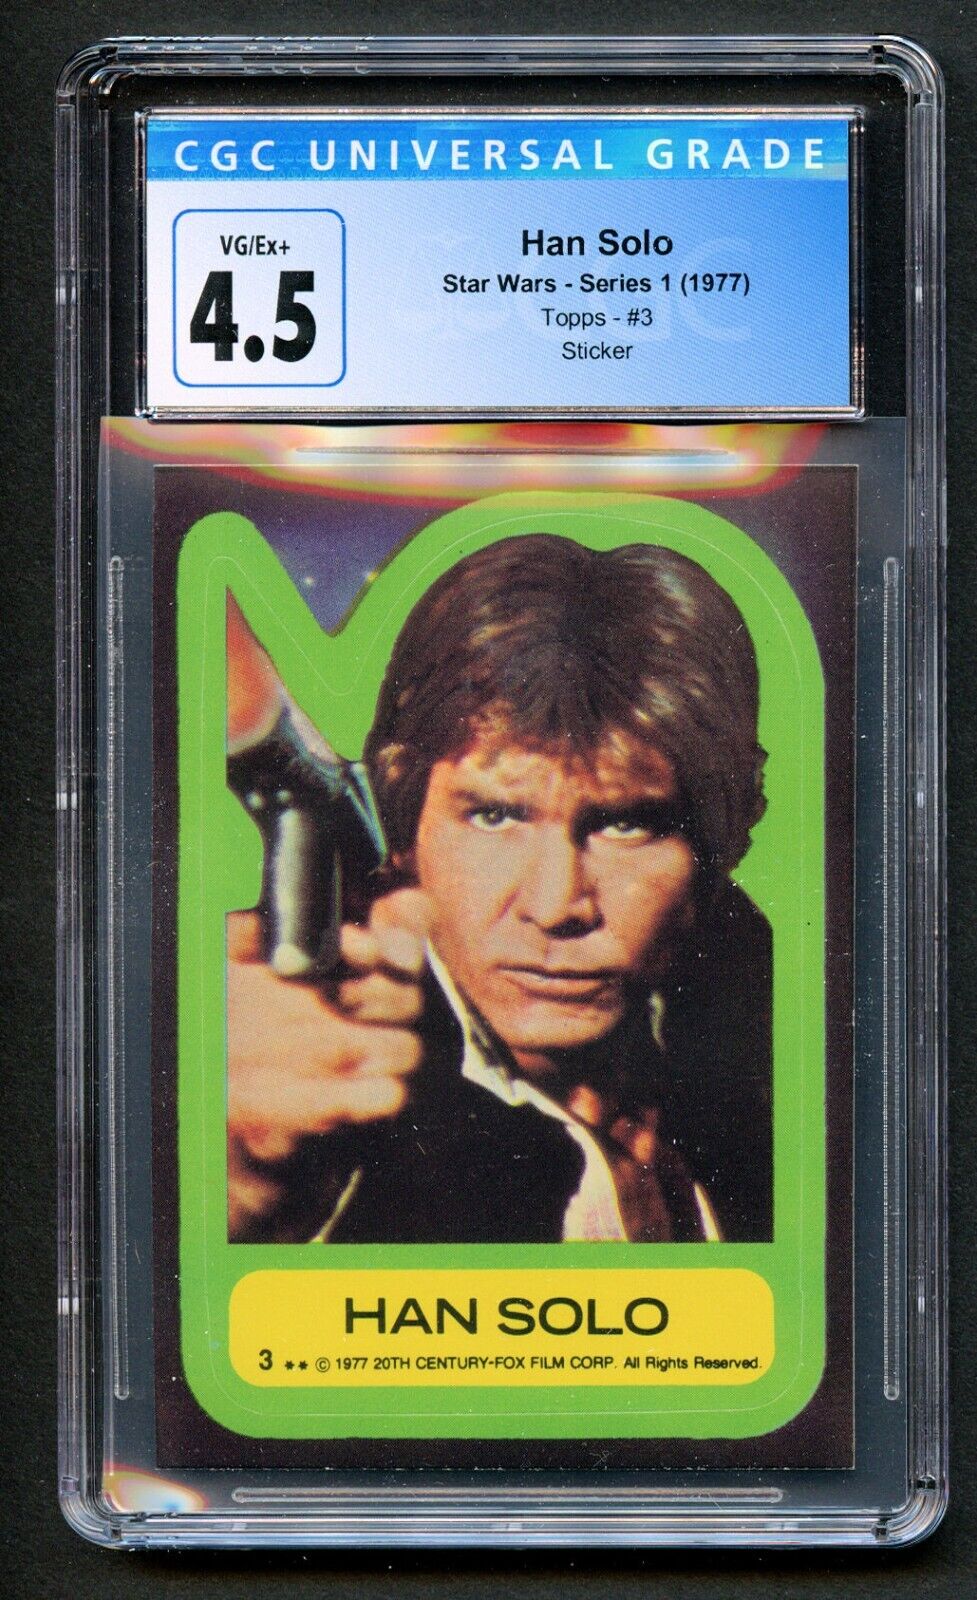 Han Solo #3 Star Wars Series 1 Topps 1977 Sticker Trading Card CGC 4.5